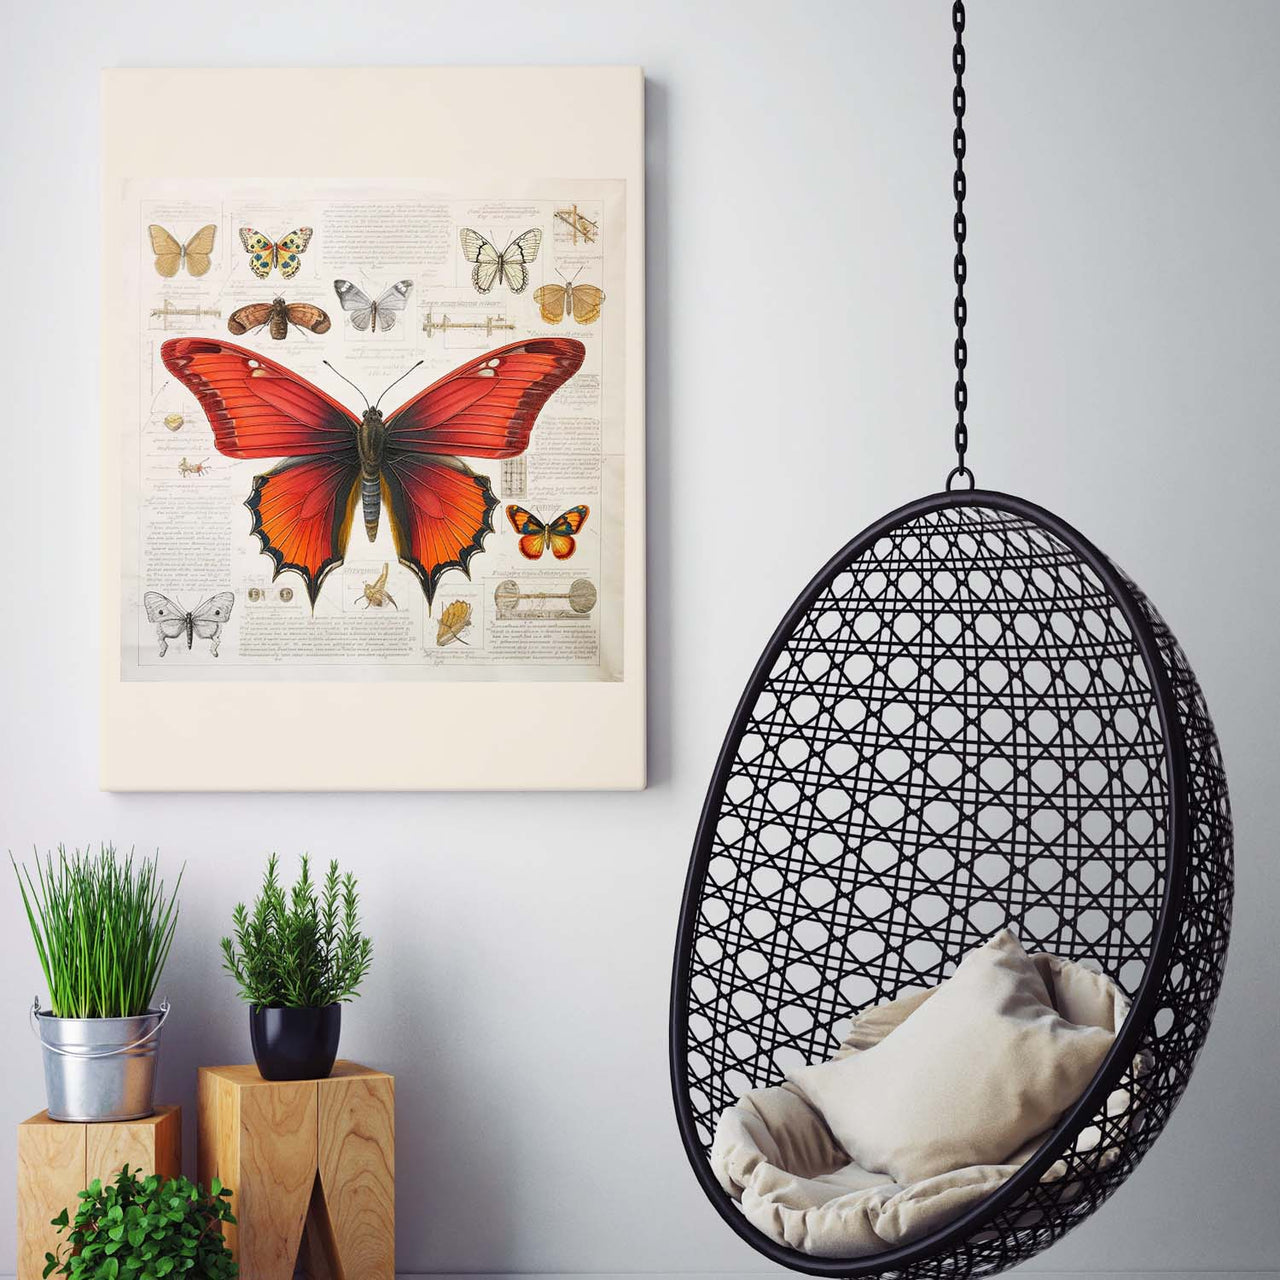 Drawings Butterfly Red Da Vinci Style Vintage Framed Canvas Prints Wall Art Hanging Home Decor